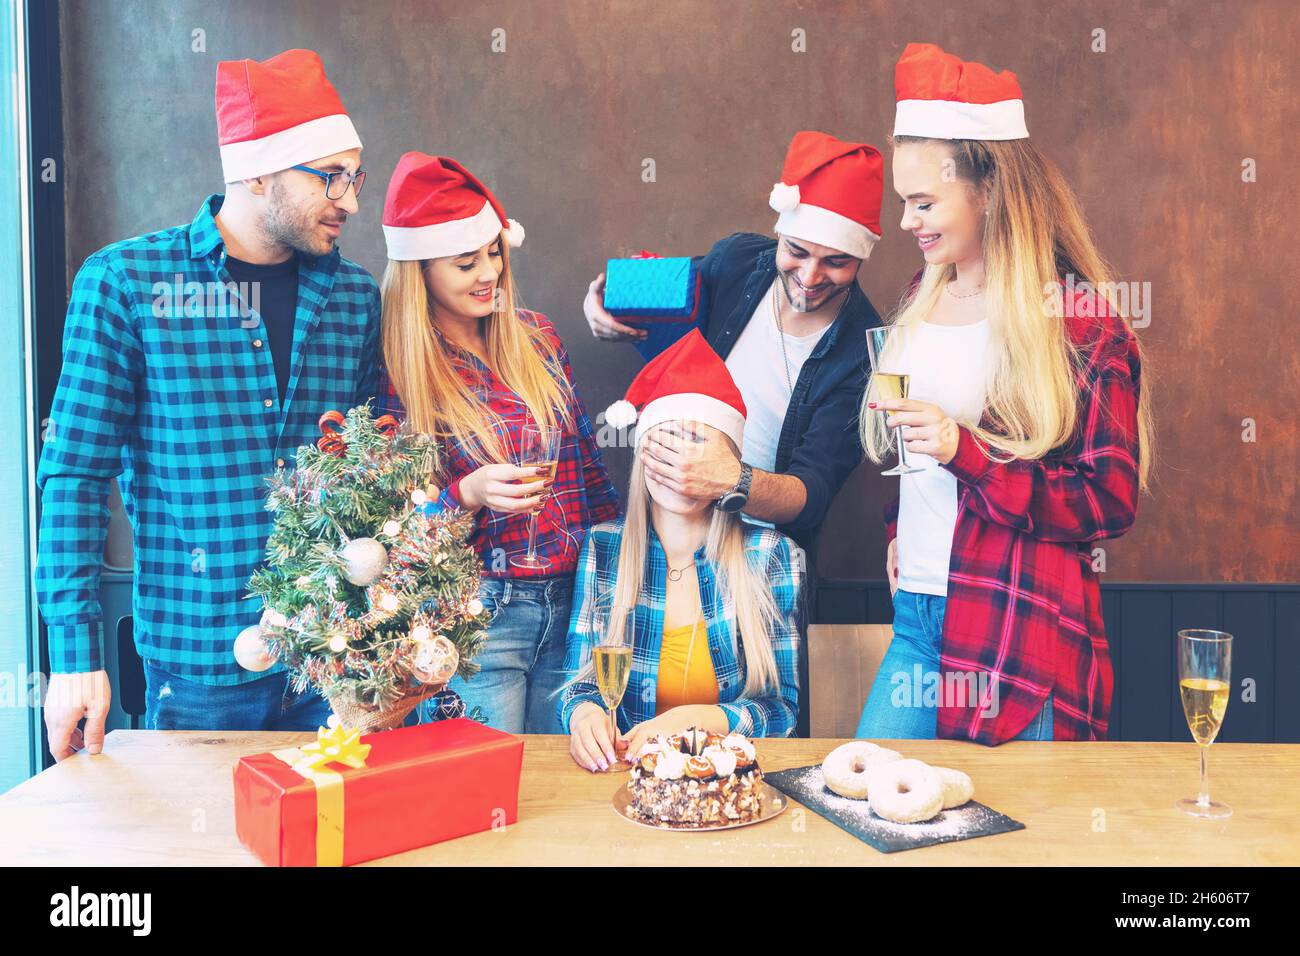 Group of friends with Santa hats celebrating Christmas by sharing presents and drinking champagne at party Stock Photo